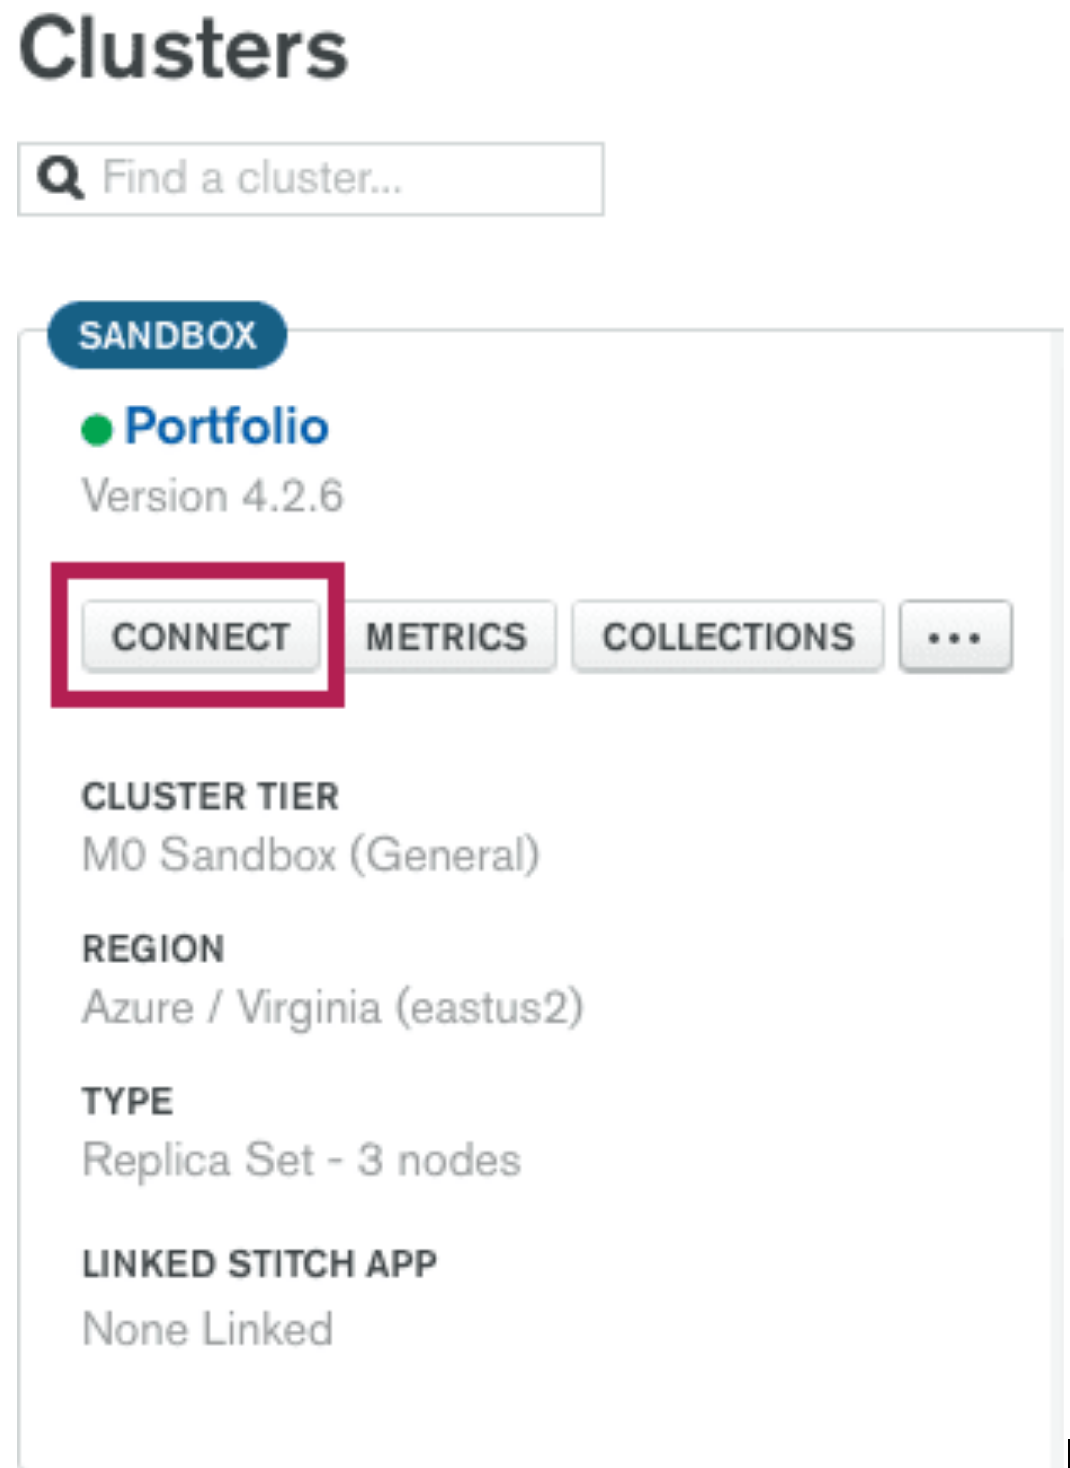 Screenshot of the 'Clusters' screen on MongoDB Atlas, with a box highlighting the Connect button.